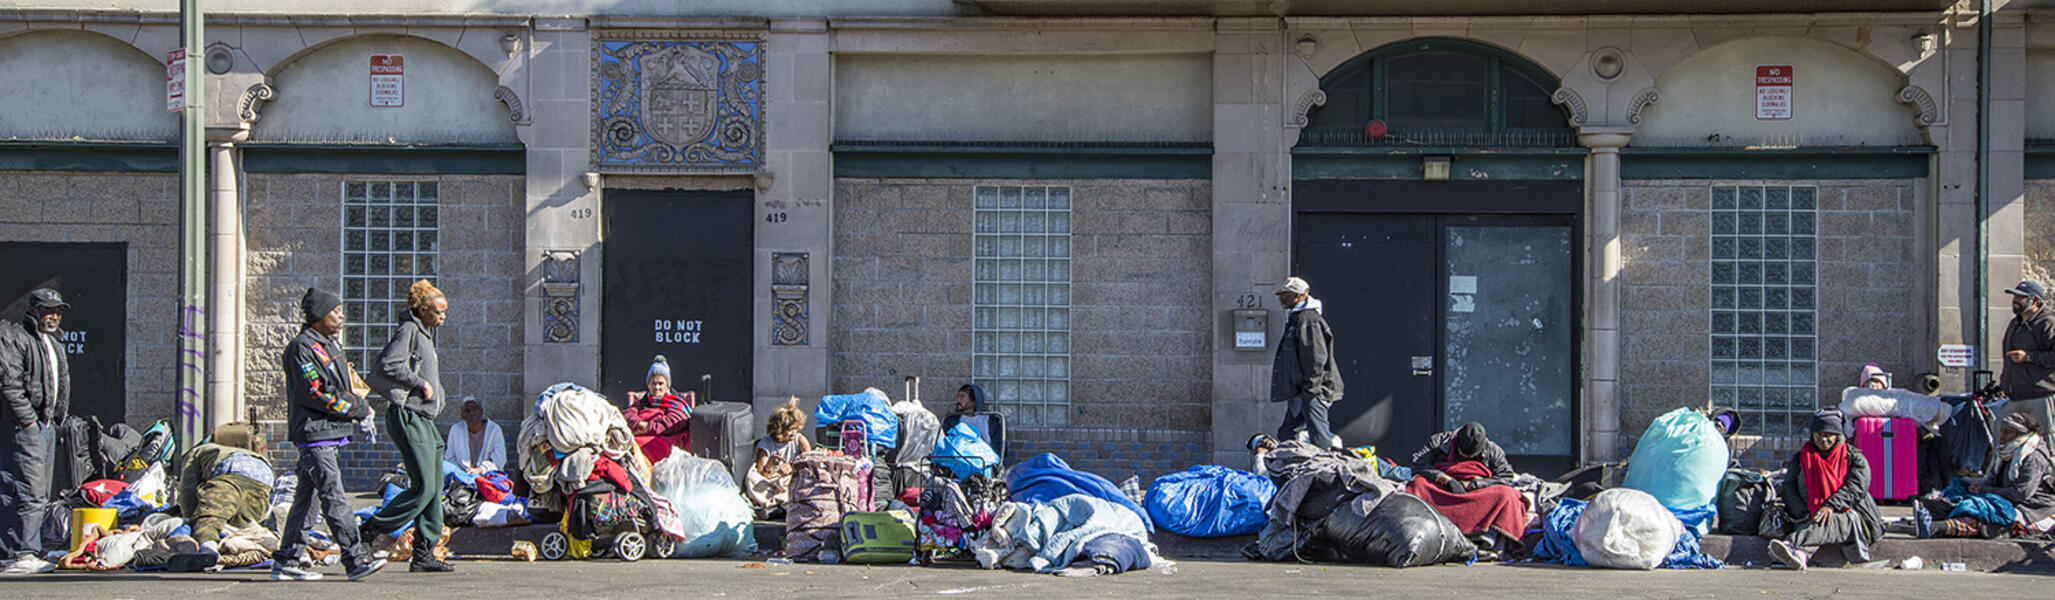 A Cold Morning in Skid Row